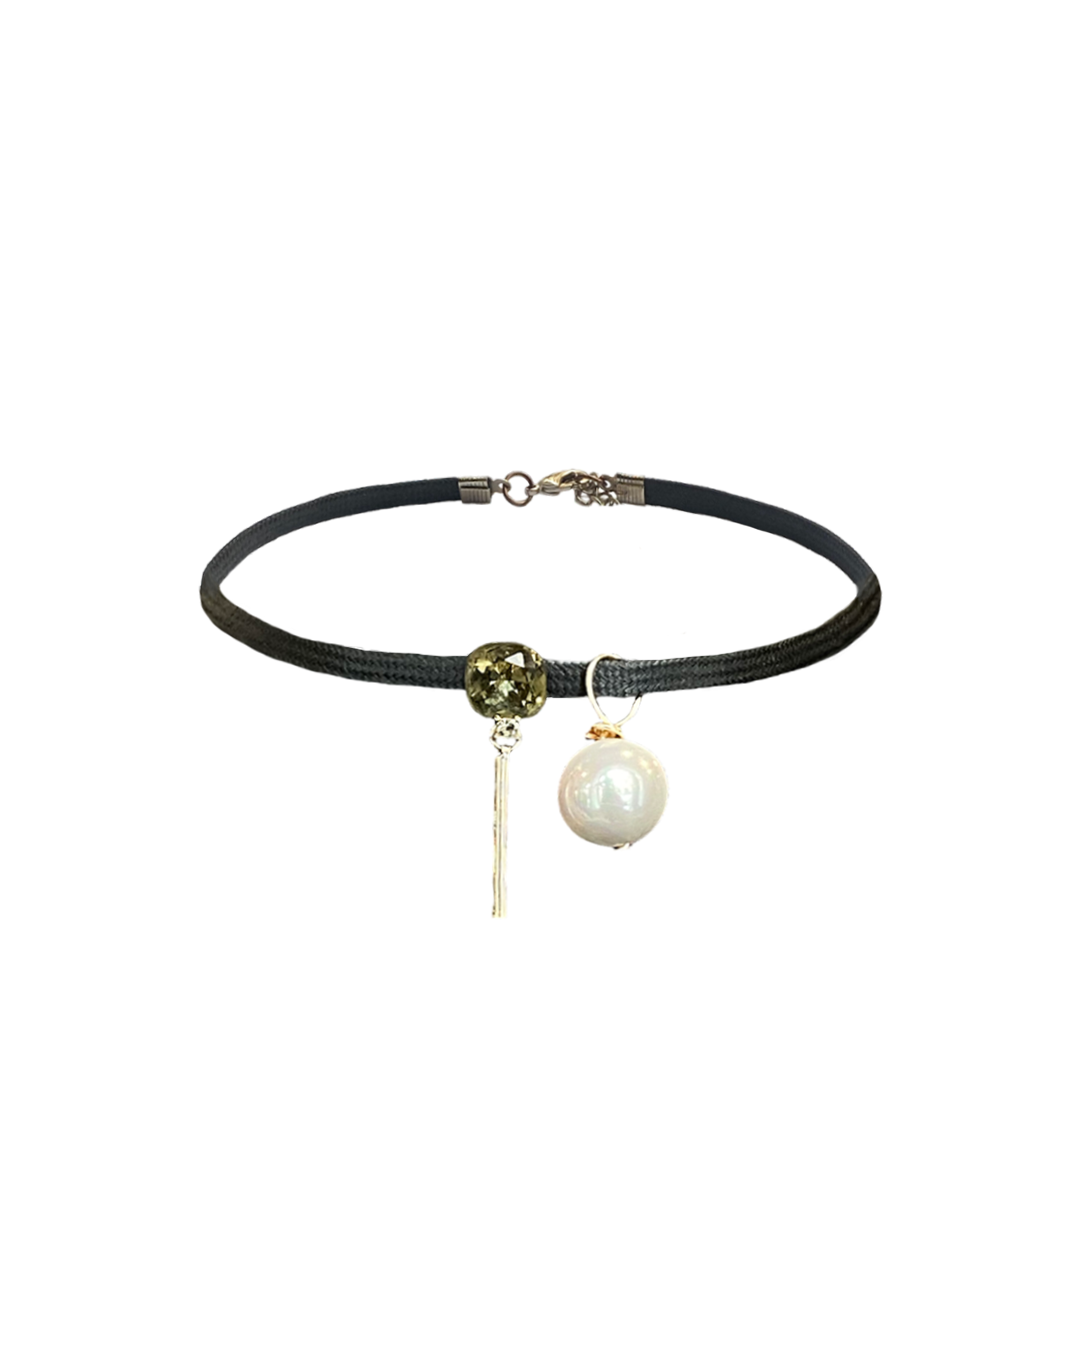 THIN ECO LEATHER CHOKER WITH CRYSTAL STONE AND PEARLS DETAIL - SOLD OUT